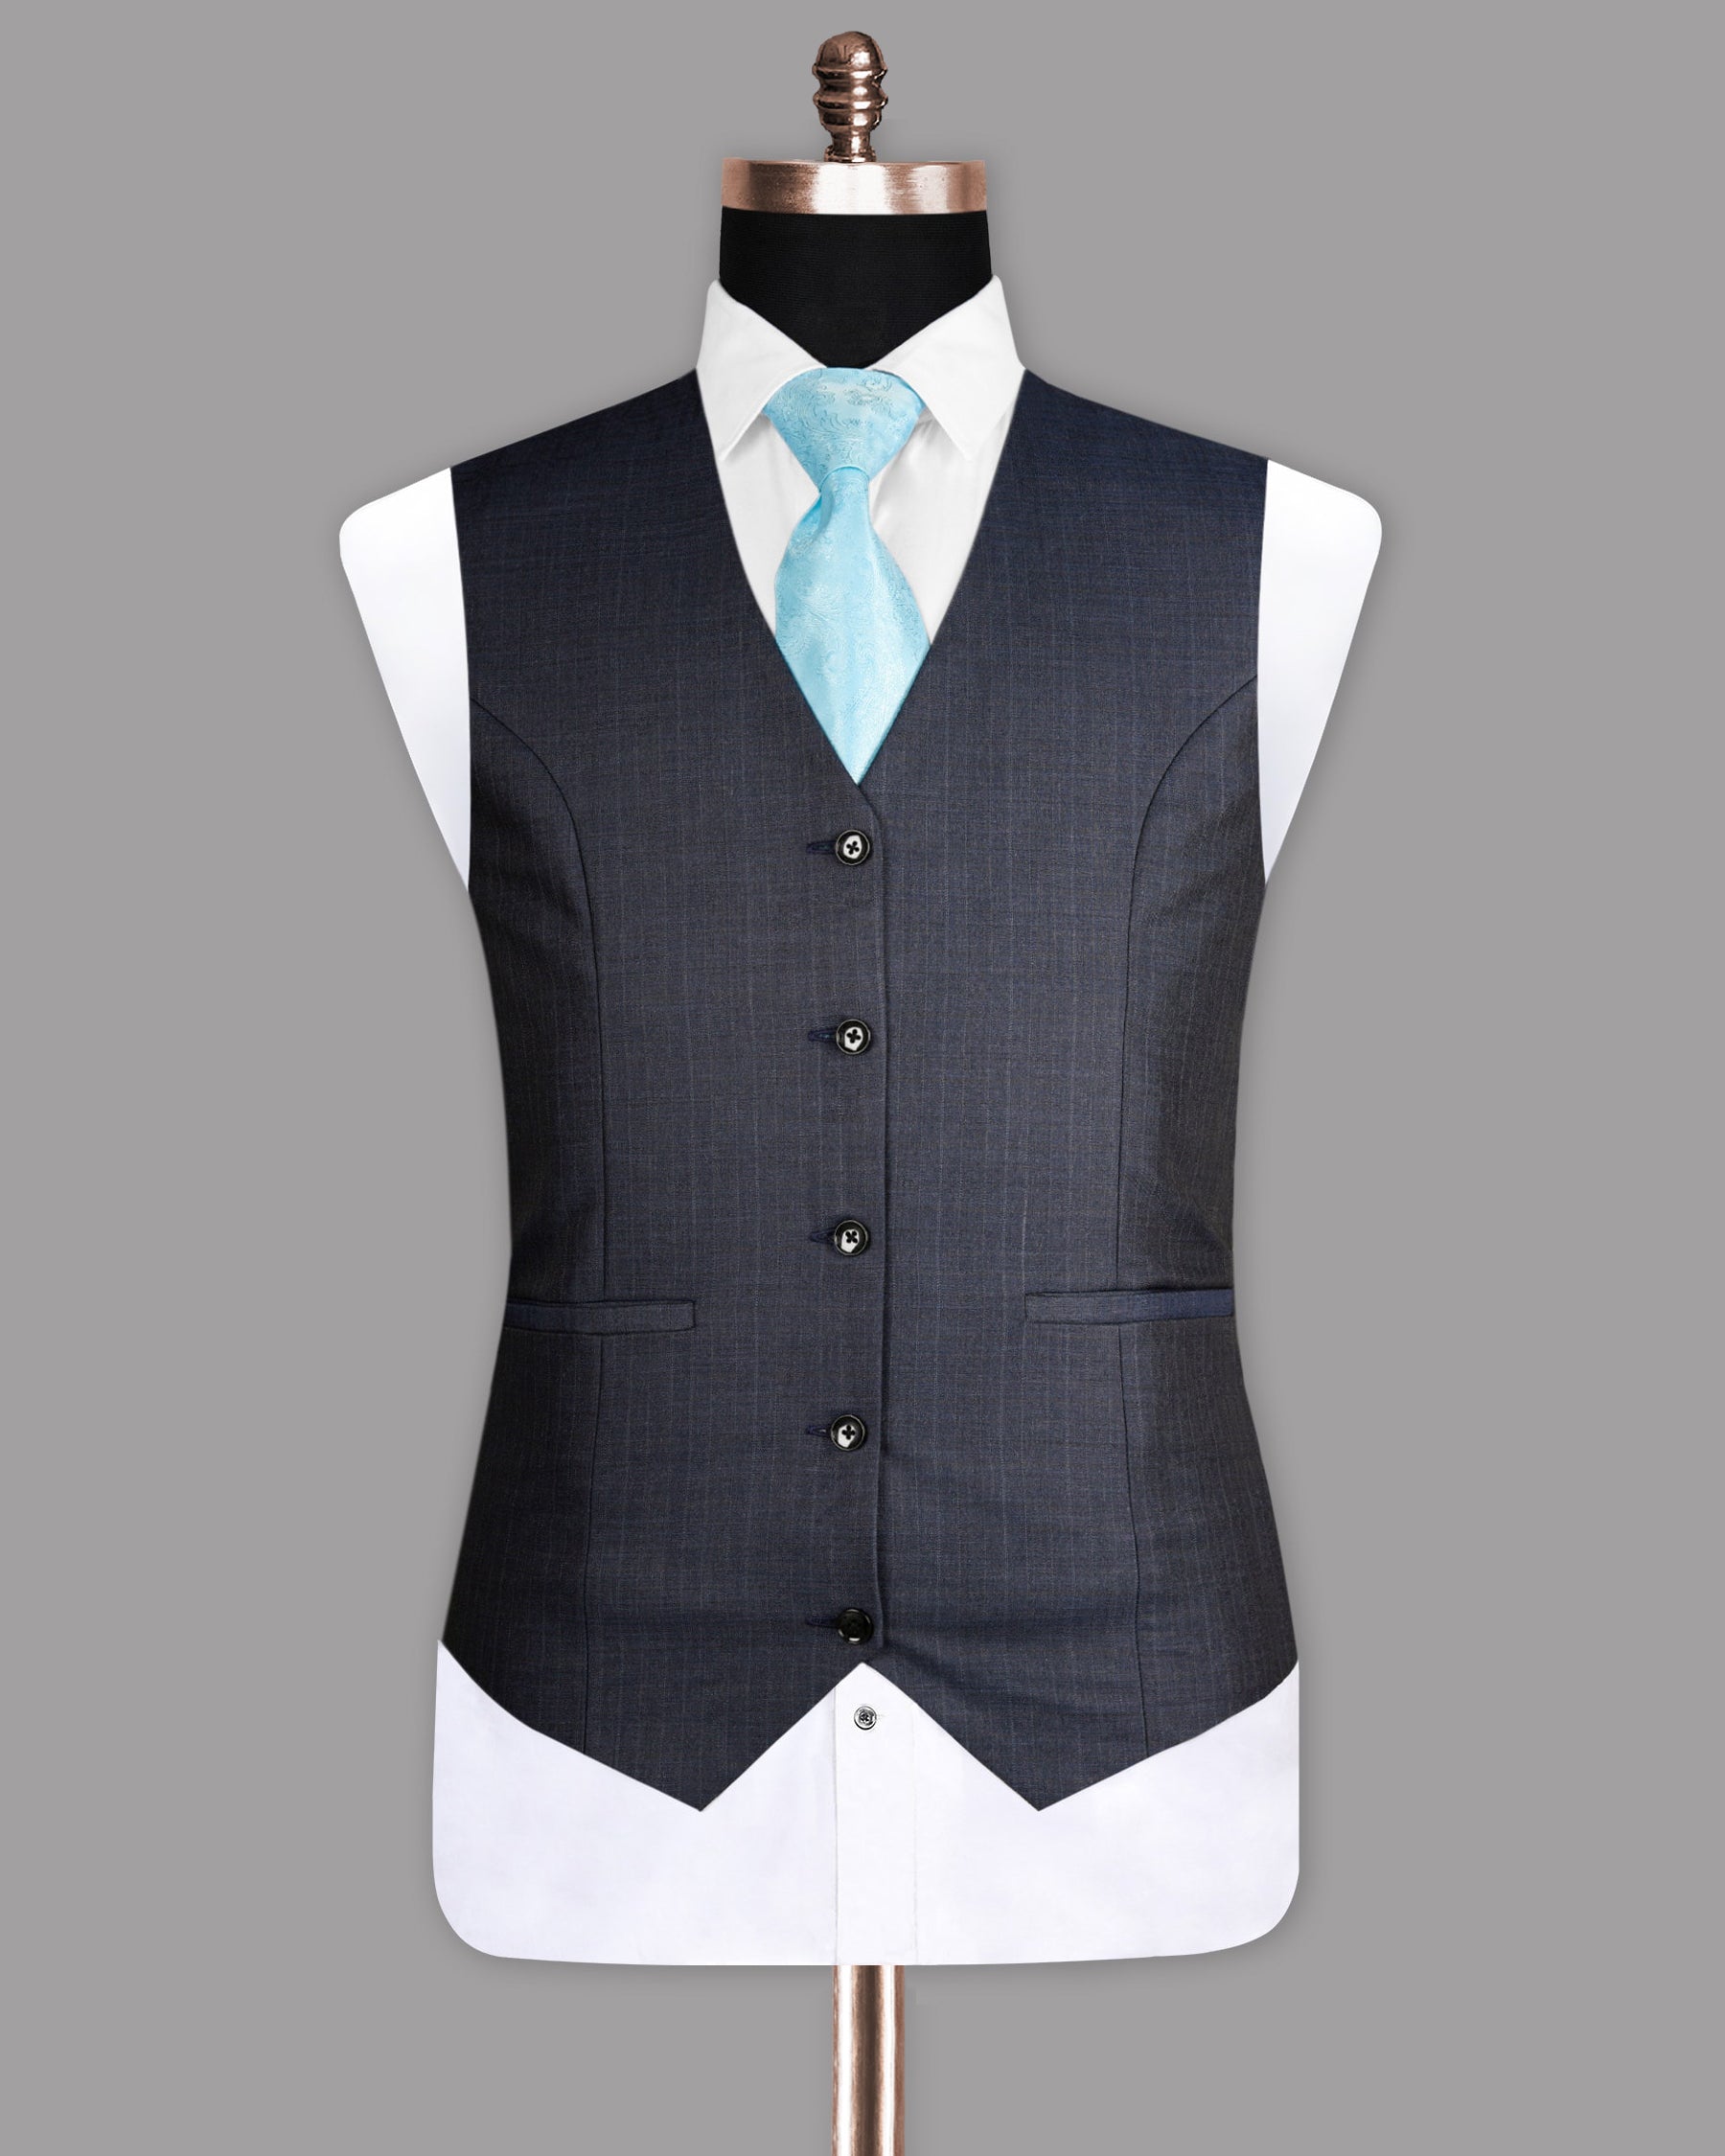 Ship Gray with Blue Tonal Subtle Checked Waistcoat V1033-46, V1033-58, V1033-60, V1033-52, V1033-54, V1033-56, V1033-36, V1033-50, V1033-38, V1033-40, V1033-42, V1033-44, V1033-48